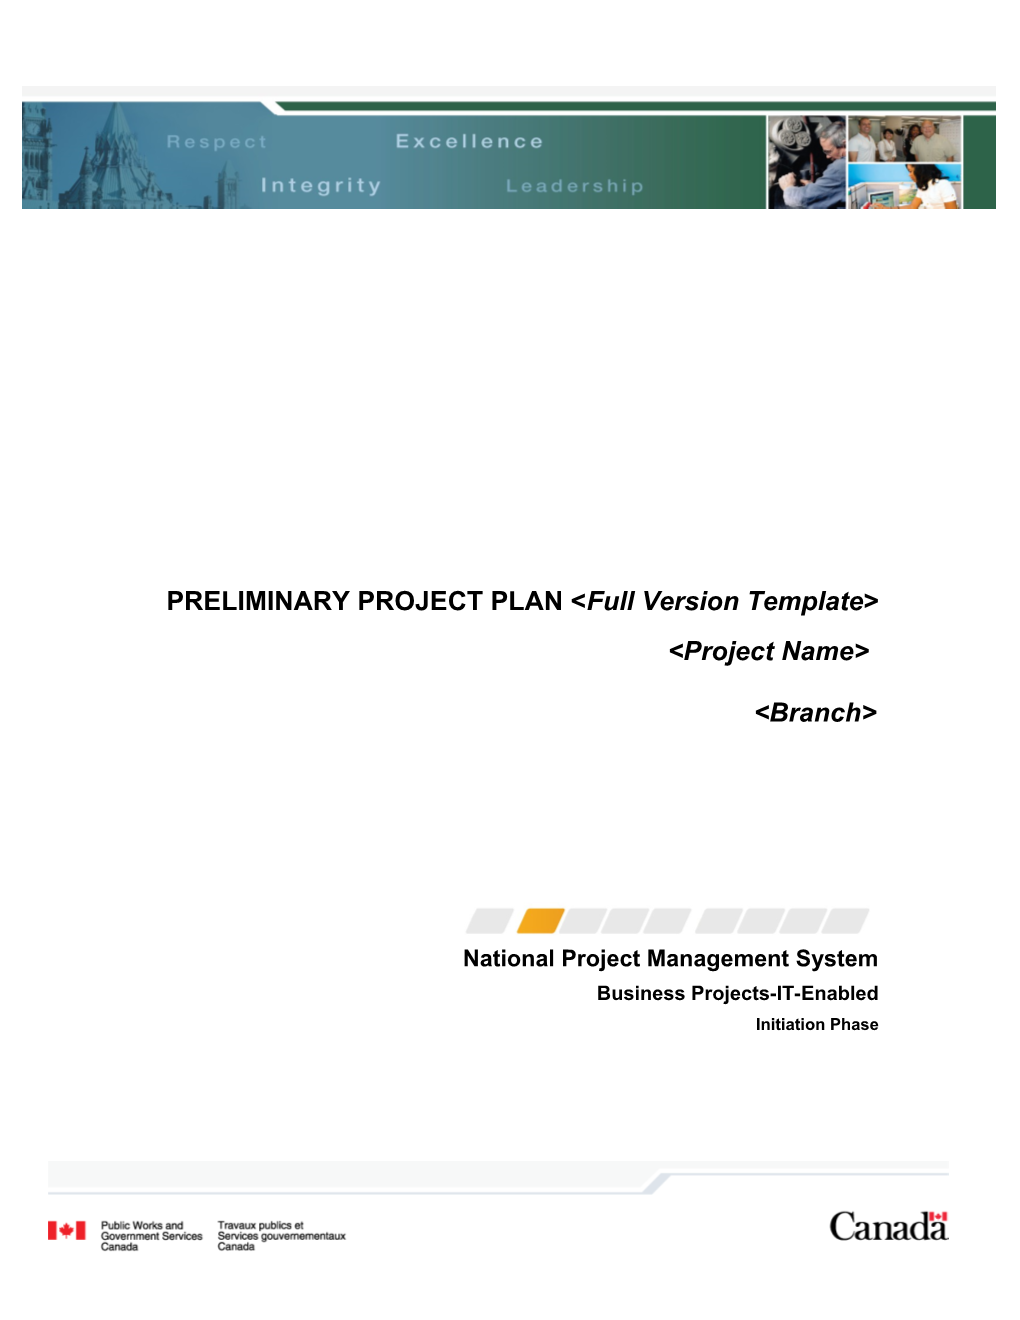 PRELIMINARYPROJECT Planfull Version Template